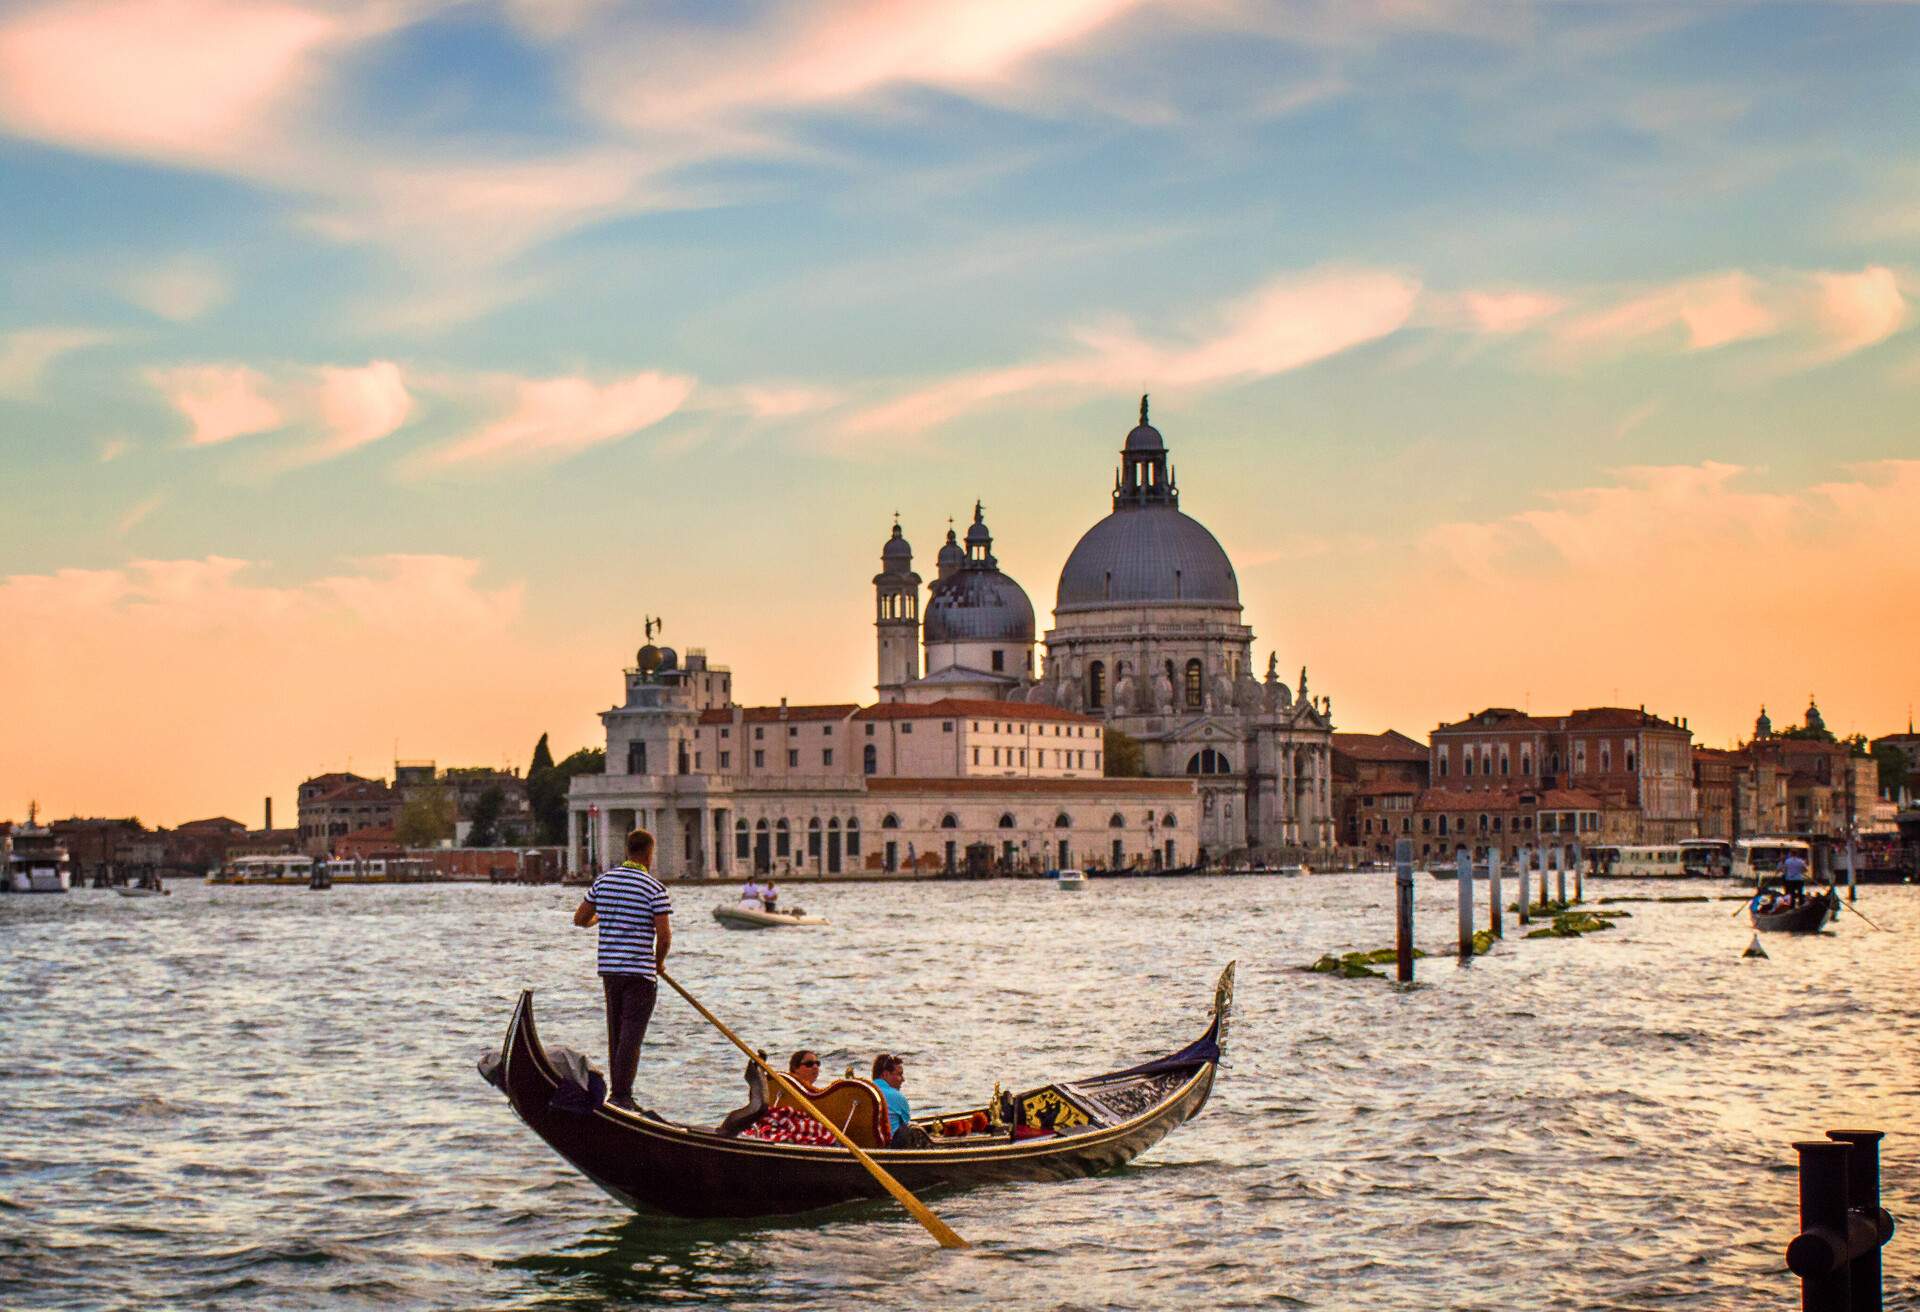 A man navigating a gondola with tourists across a water canal with distant views of a dome church under an orange sky.